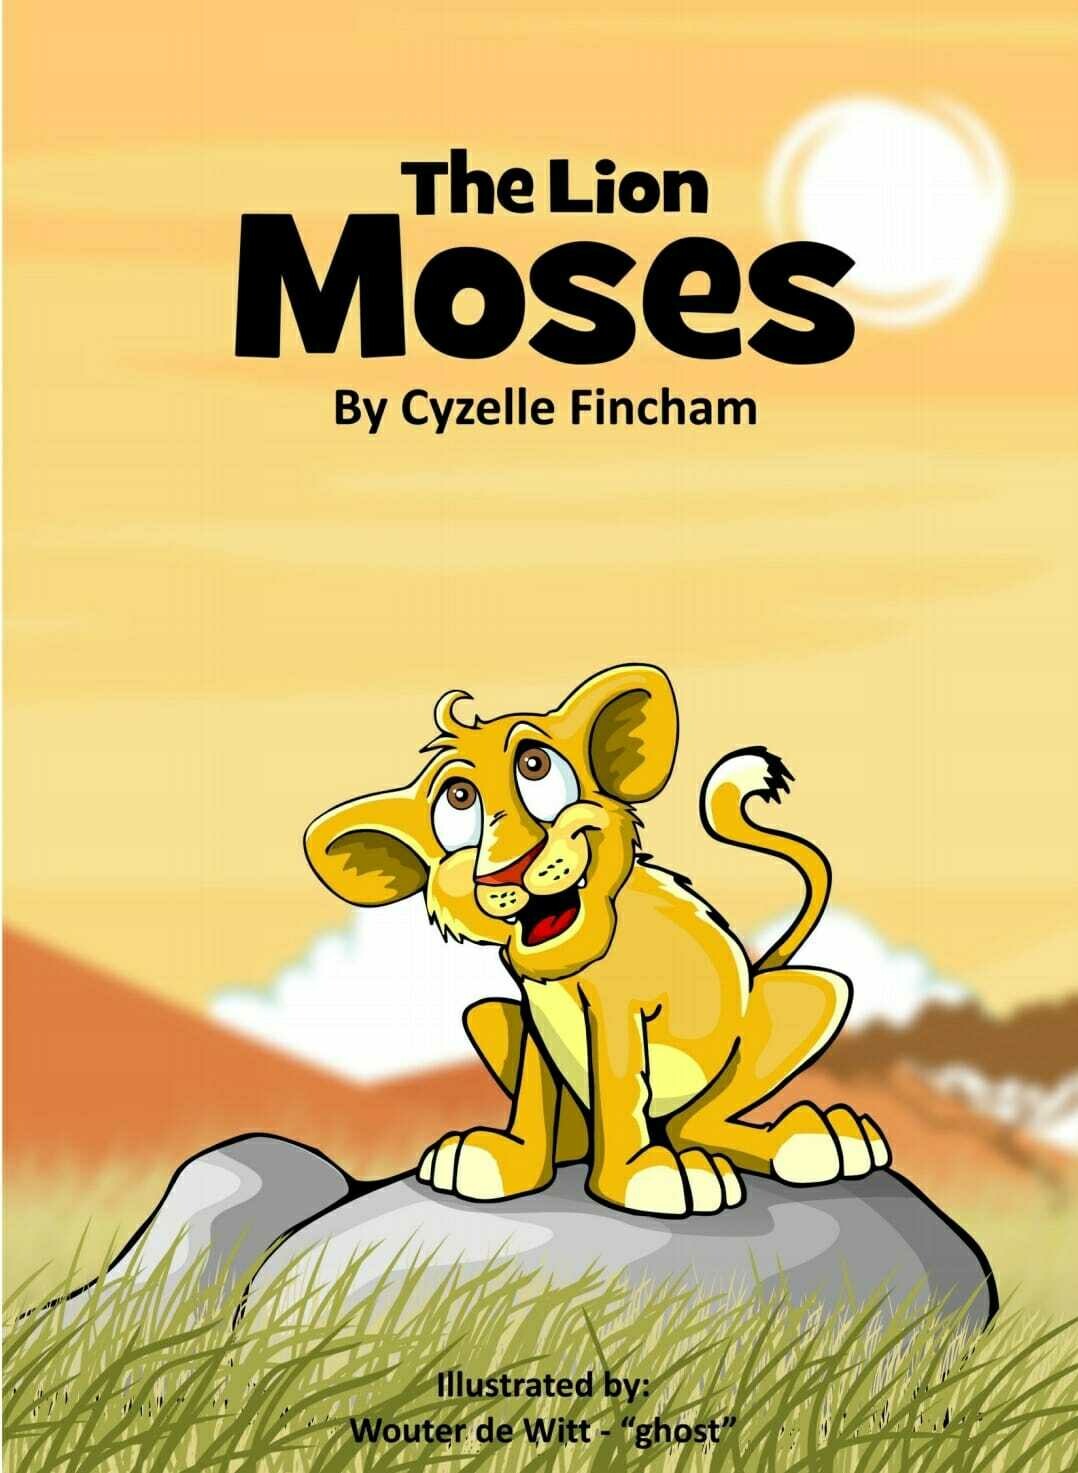 The Lion Moses